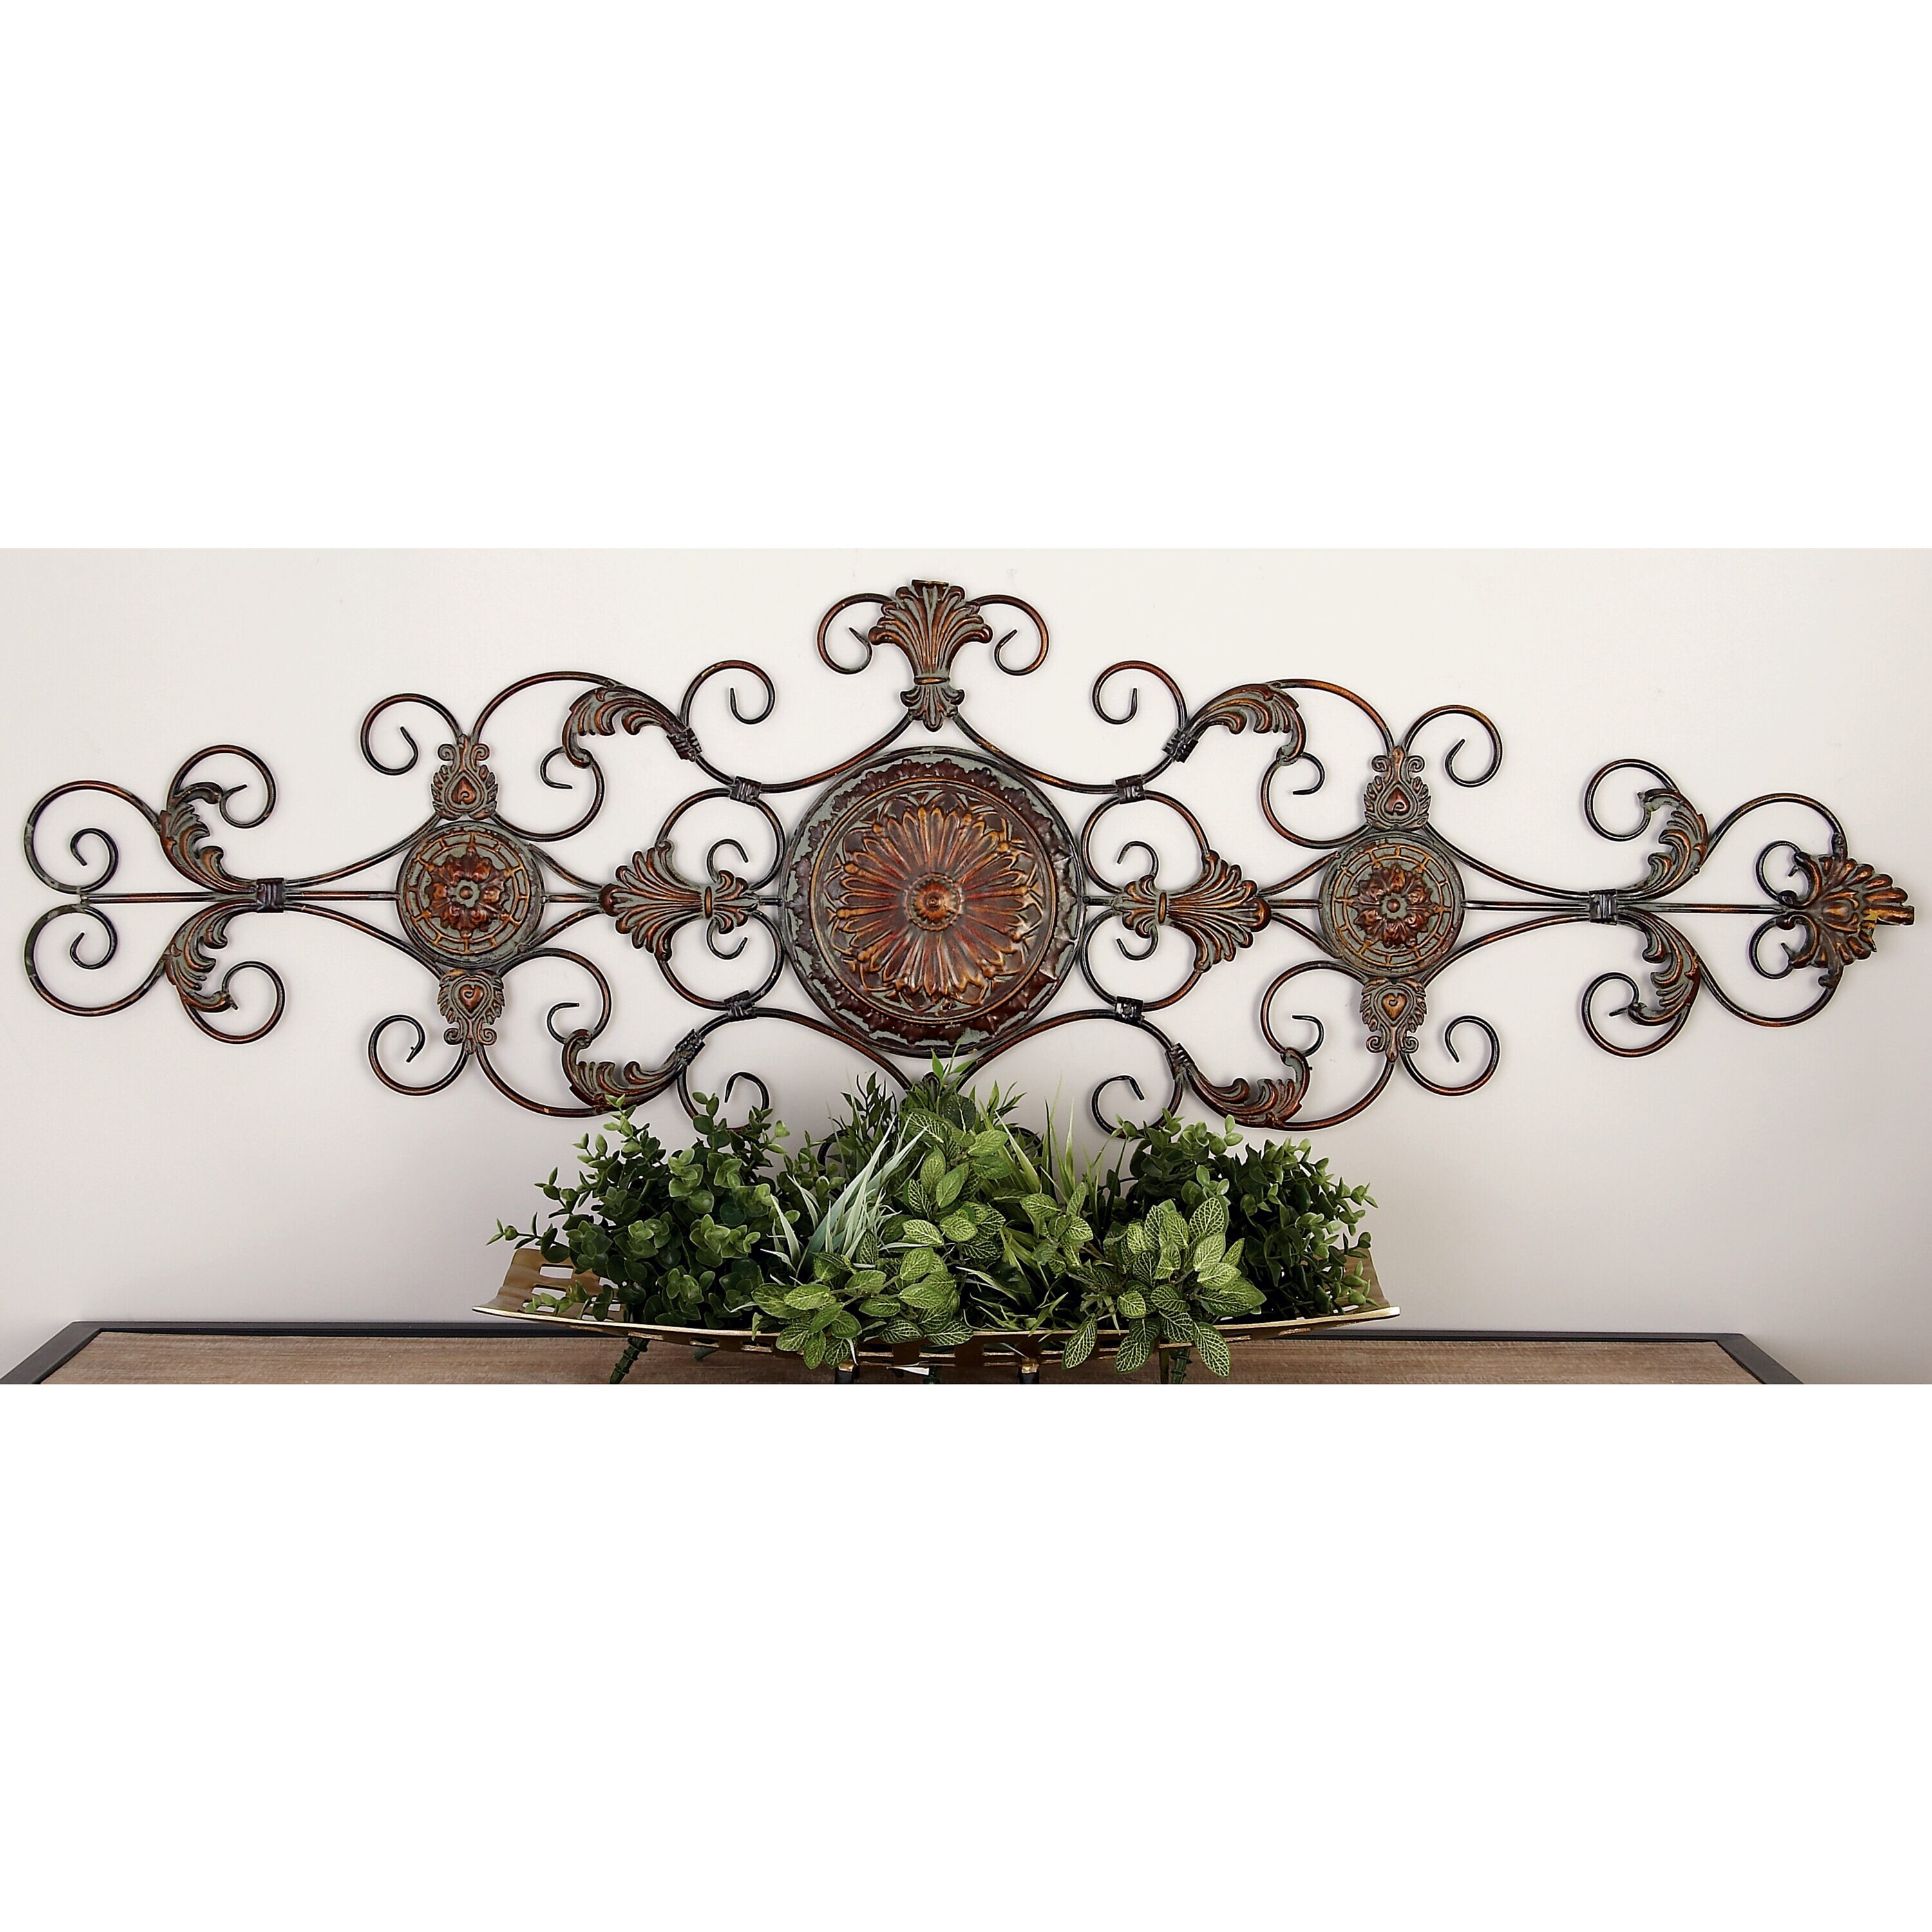 Grayson Lane 18-in W x 53-in H Metal Scroll Floral Wall Accent in